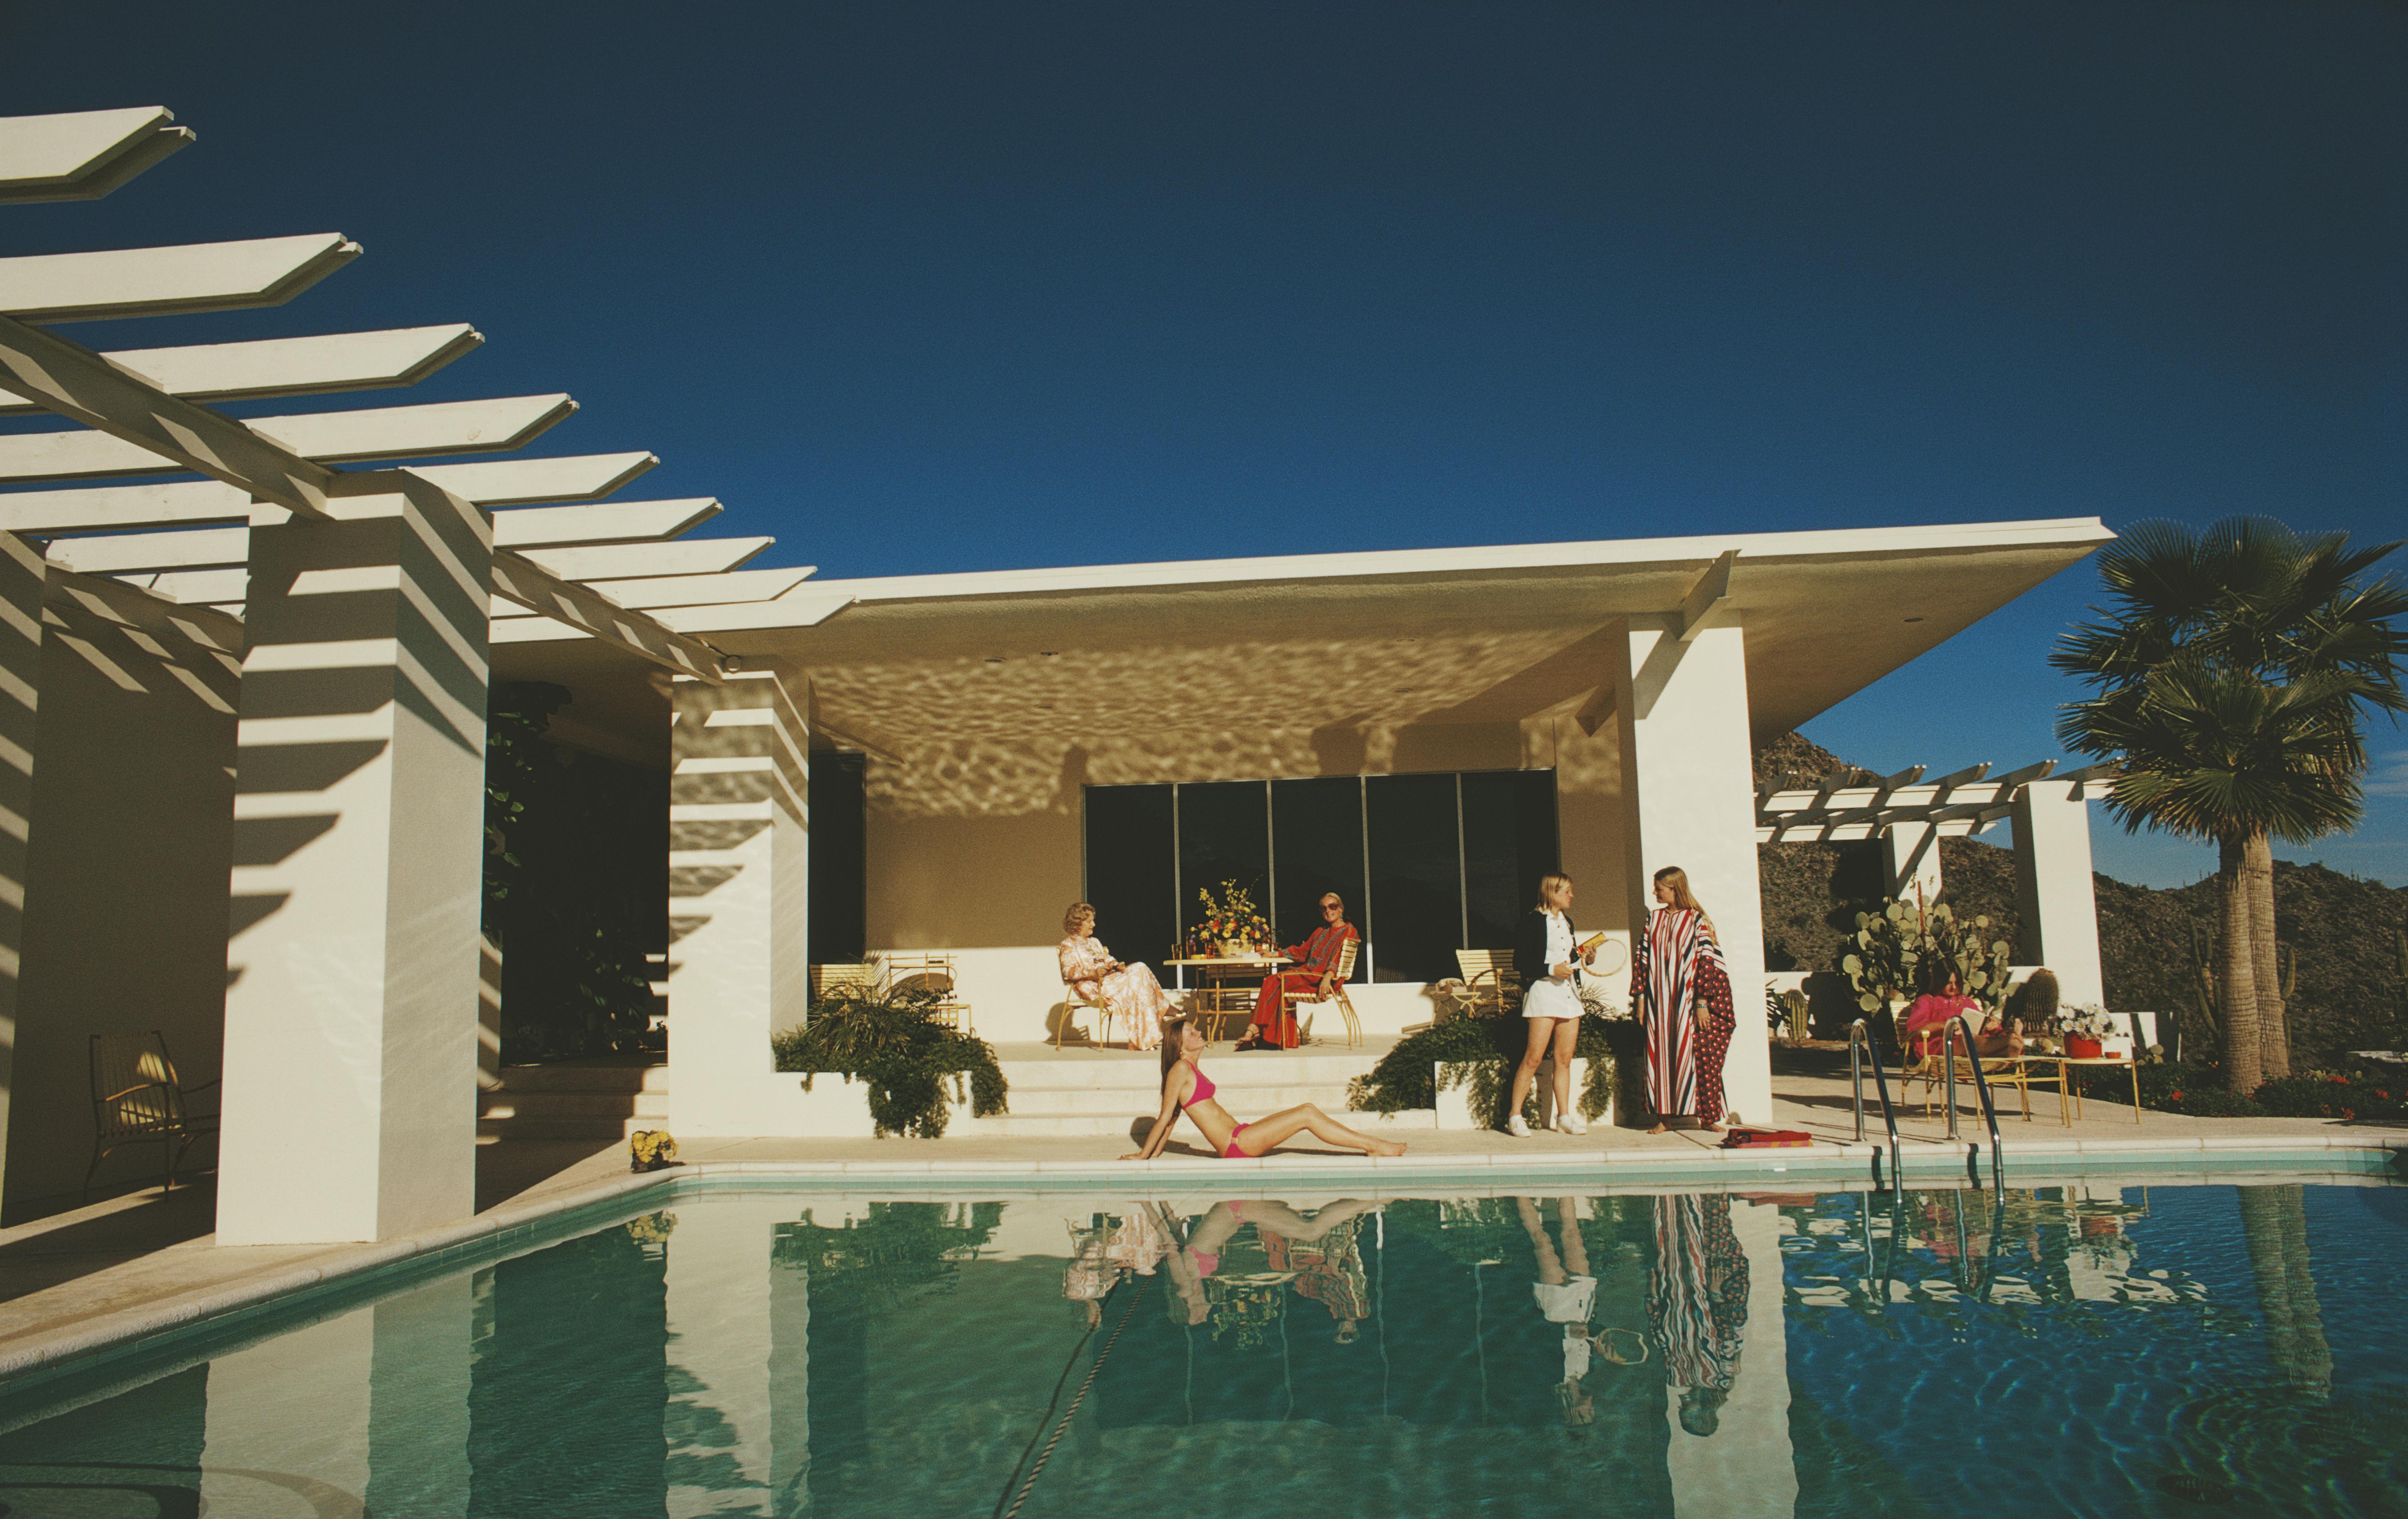 'Poolside In Arizona' 1973 Slim Aarons Limited Estate Edition Print 

Guests by the pool at the home of Wayne Beal in Scottsdale, Arizona, January 1973. 

Produced from the original transparency
Certificate of authenticity supplied 
Archive